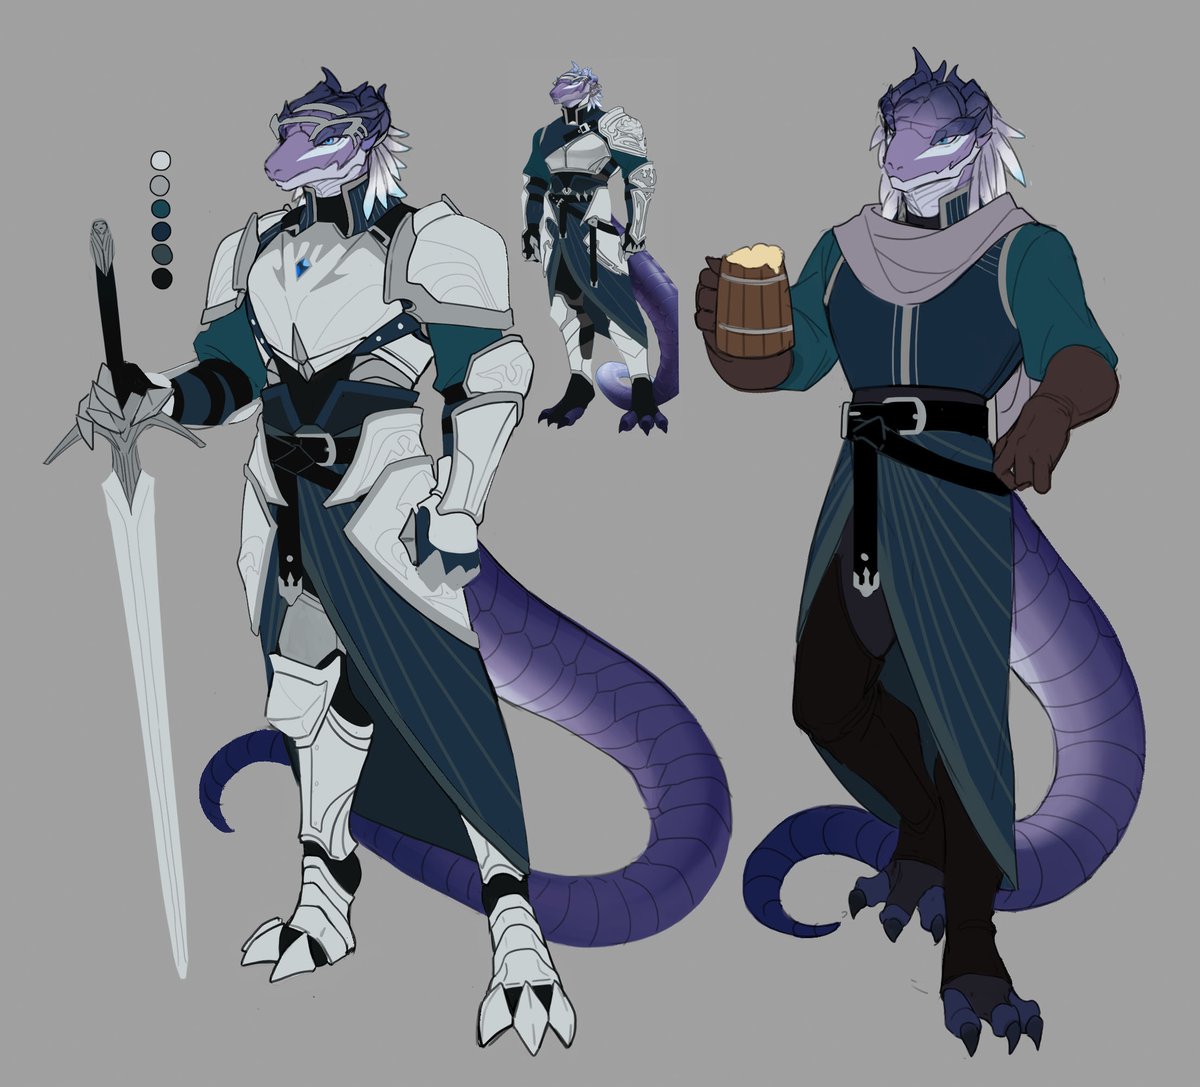 Did a few changes to Levi`s armor design, the one before feels too 'shattered' now.